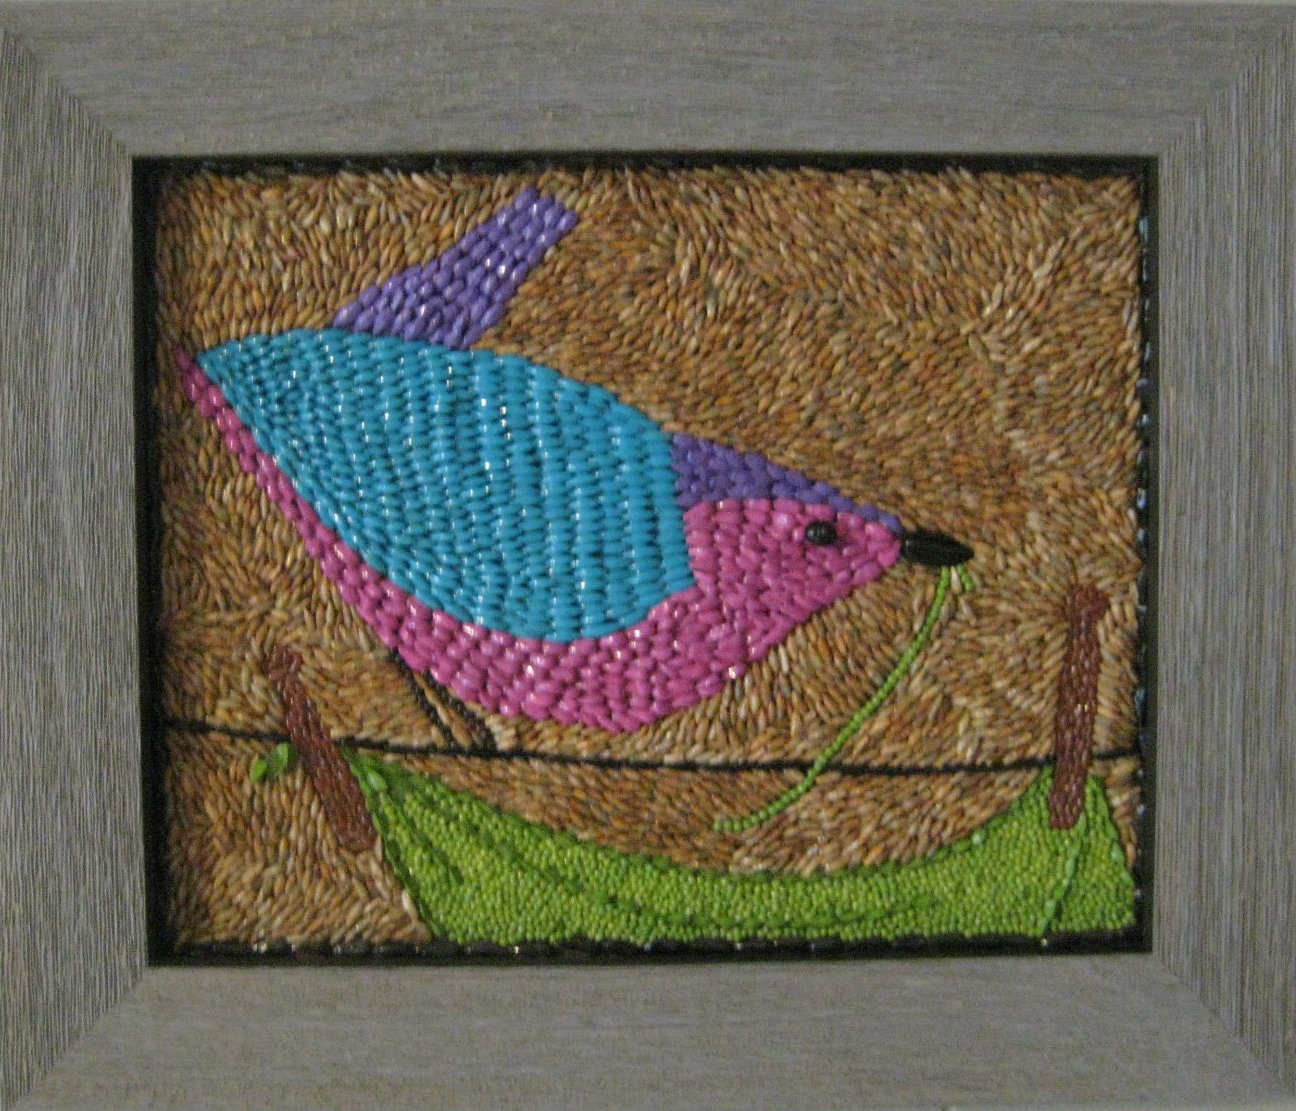 [Suzanne Mears House Wren with Clothesline based on the work of Charley Harper image]